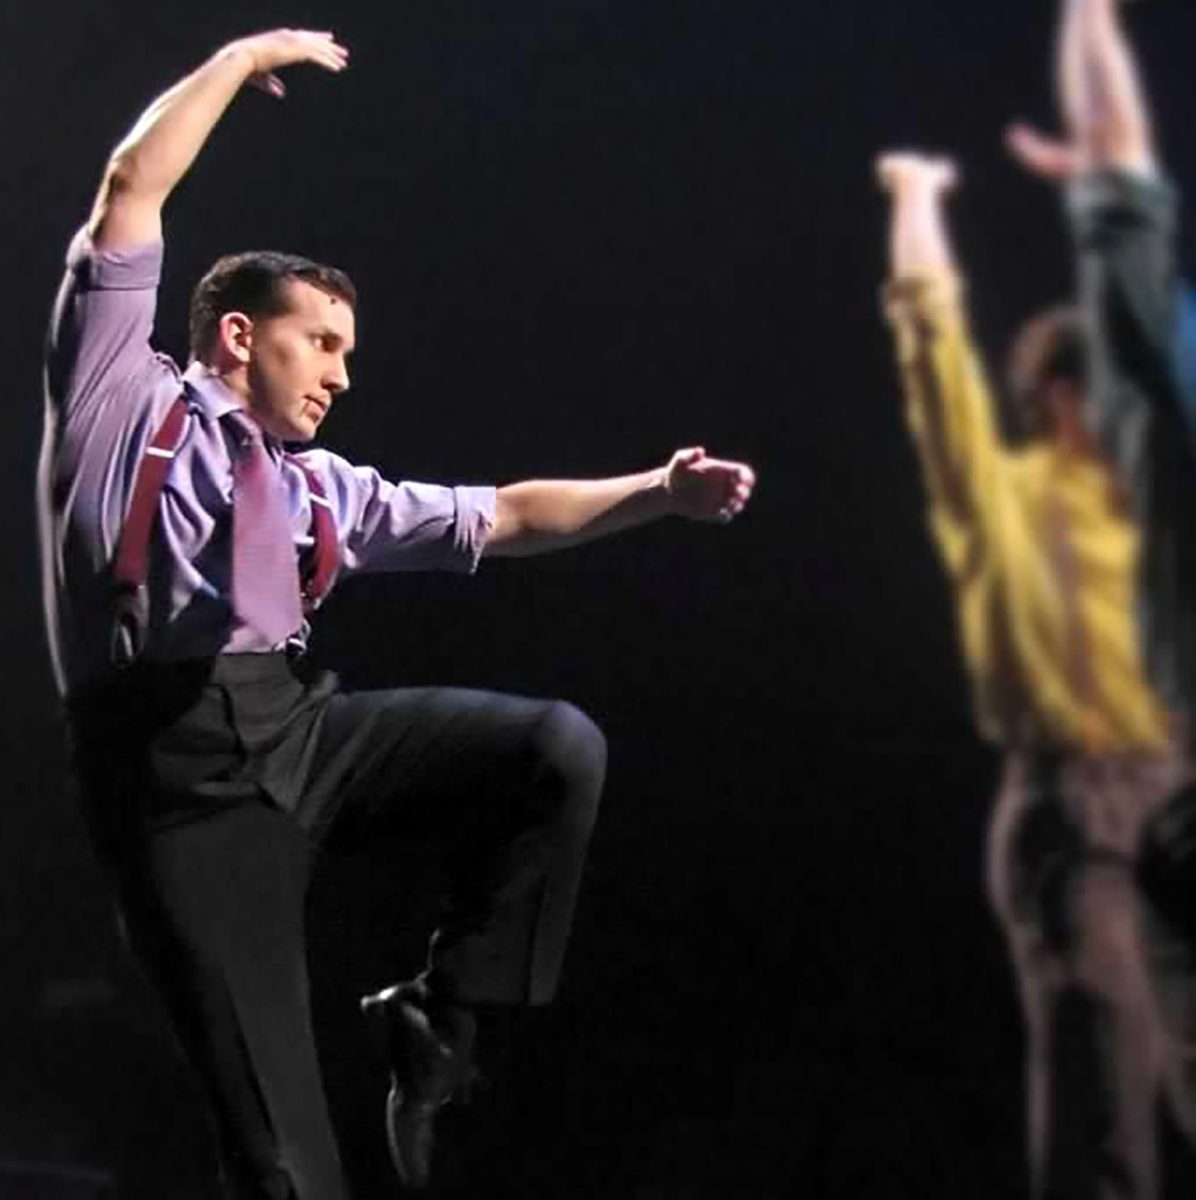 Steve Konopelski, a first-year communications student, performs in a regional production of “Guys and Dolls,” one of multiple shows he has appeared in.